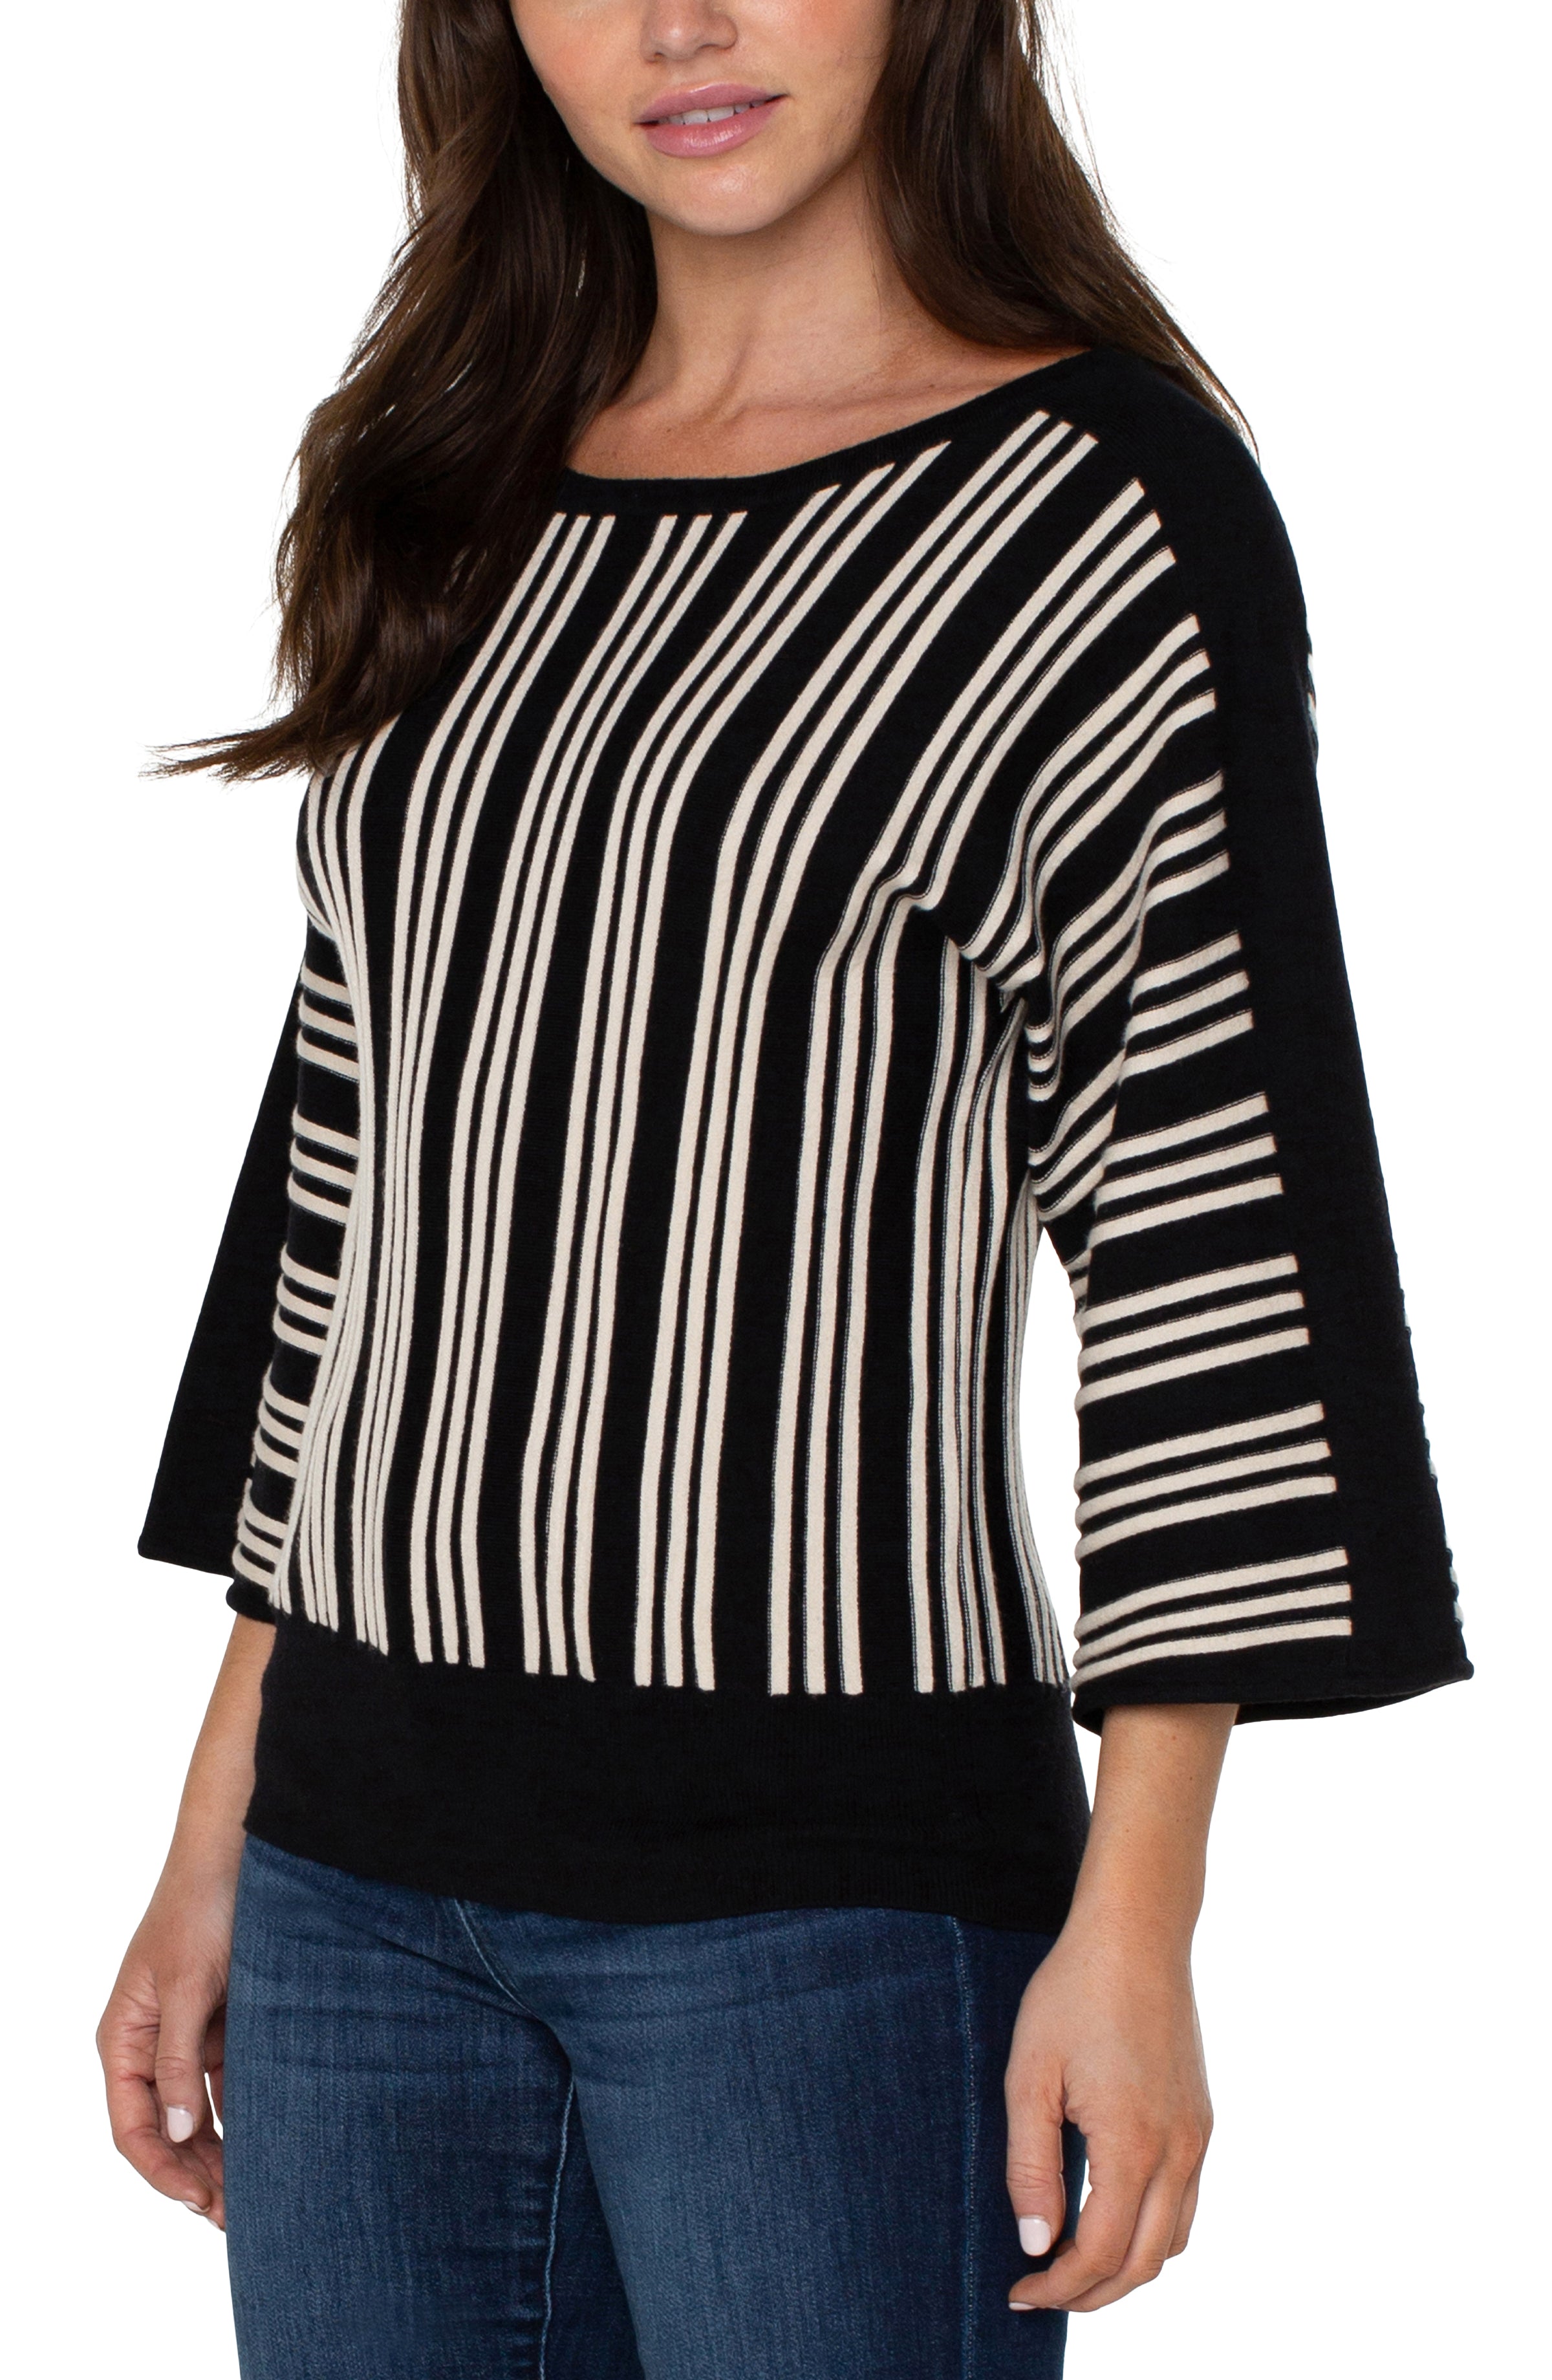 Black and white stripe dolman sweater by Liverpool at Tru Blue Boutique